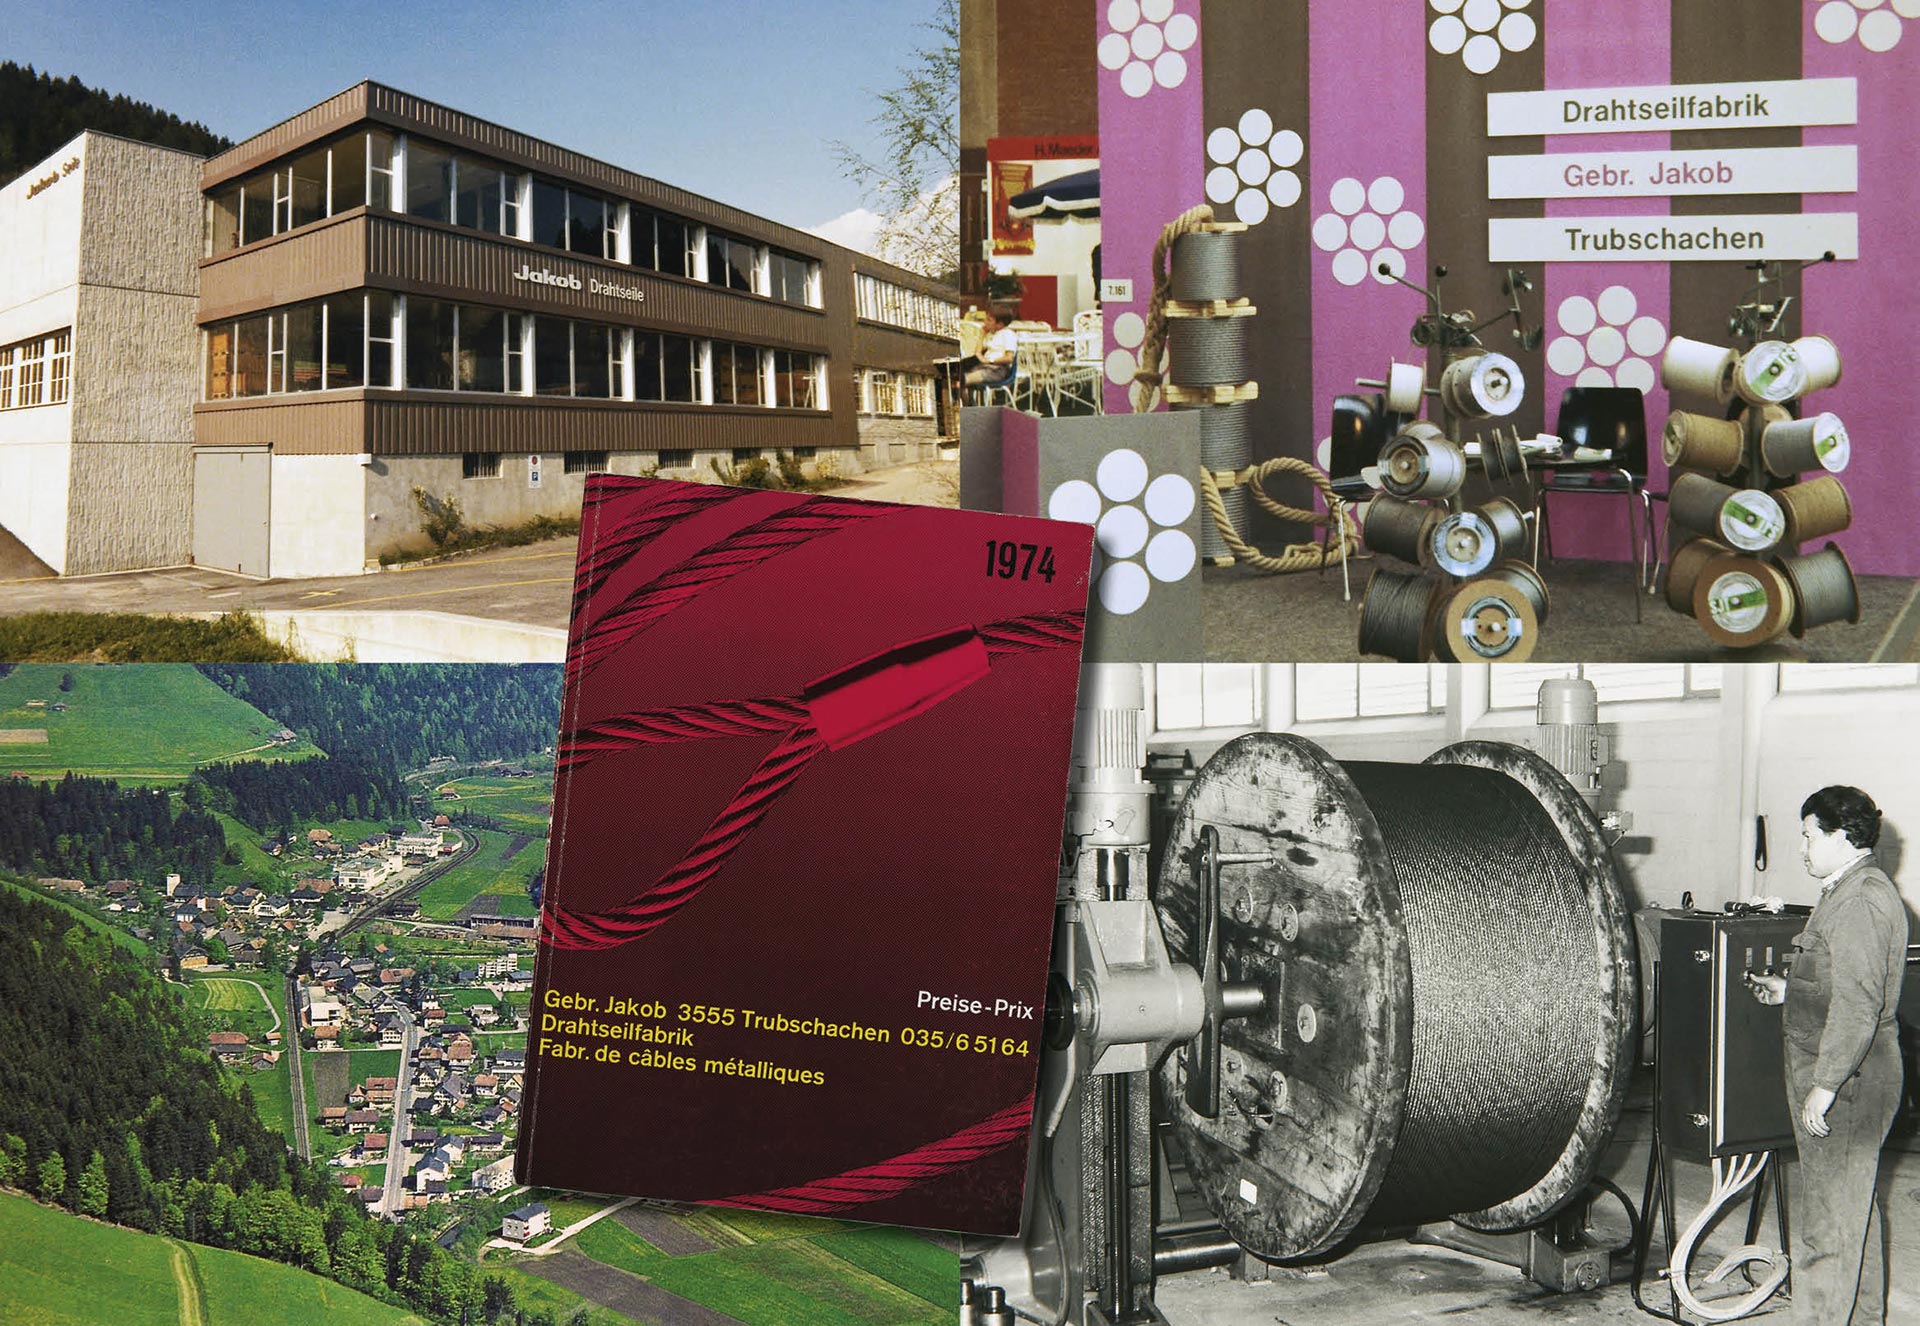 Image montage of the Jakob office in 1970s, trade fair presentations and a price list